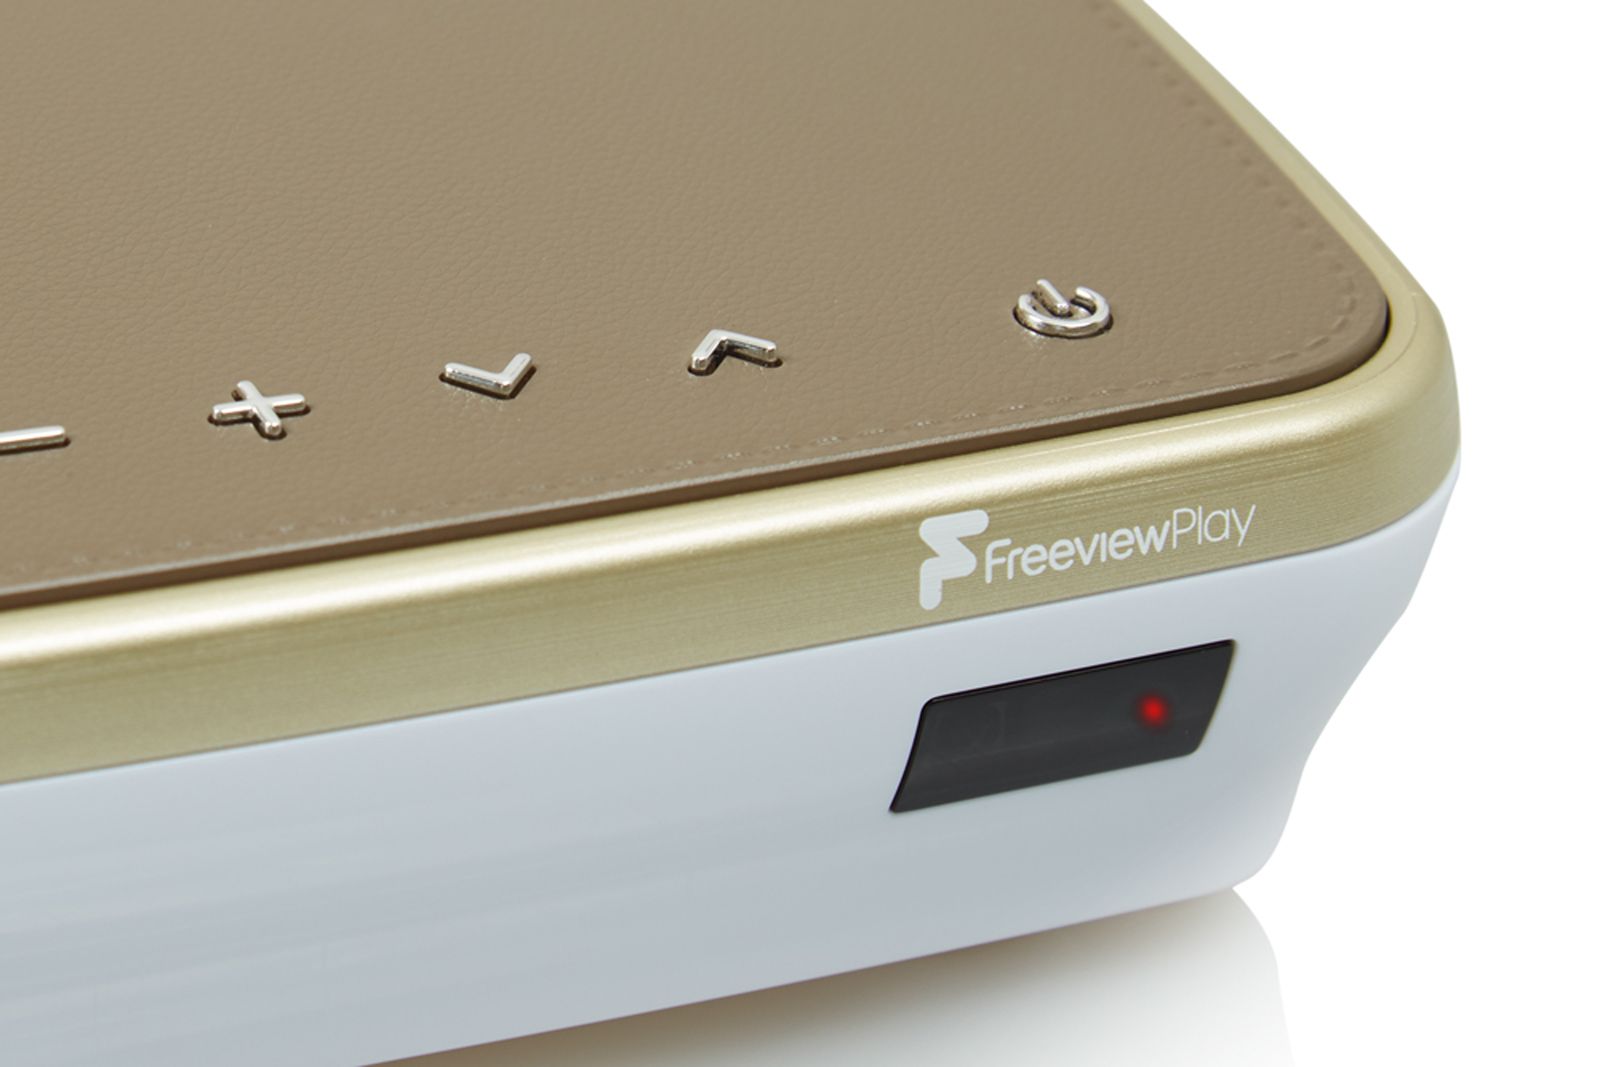 humax unveils the first freeview play set top box image 1